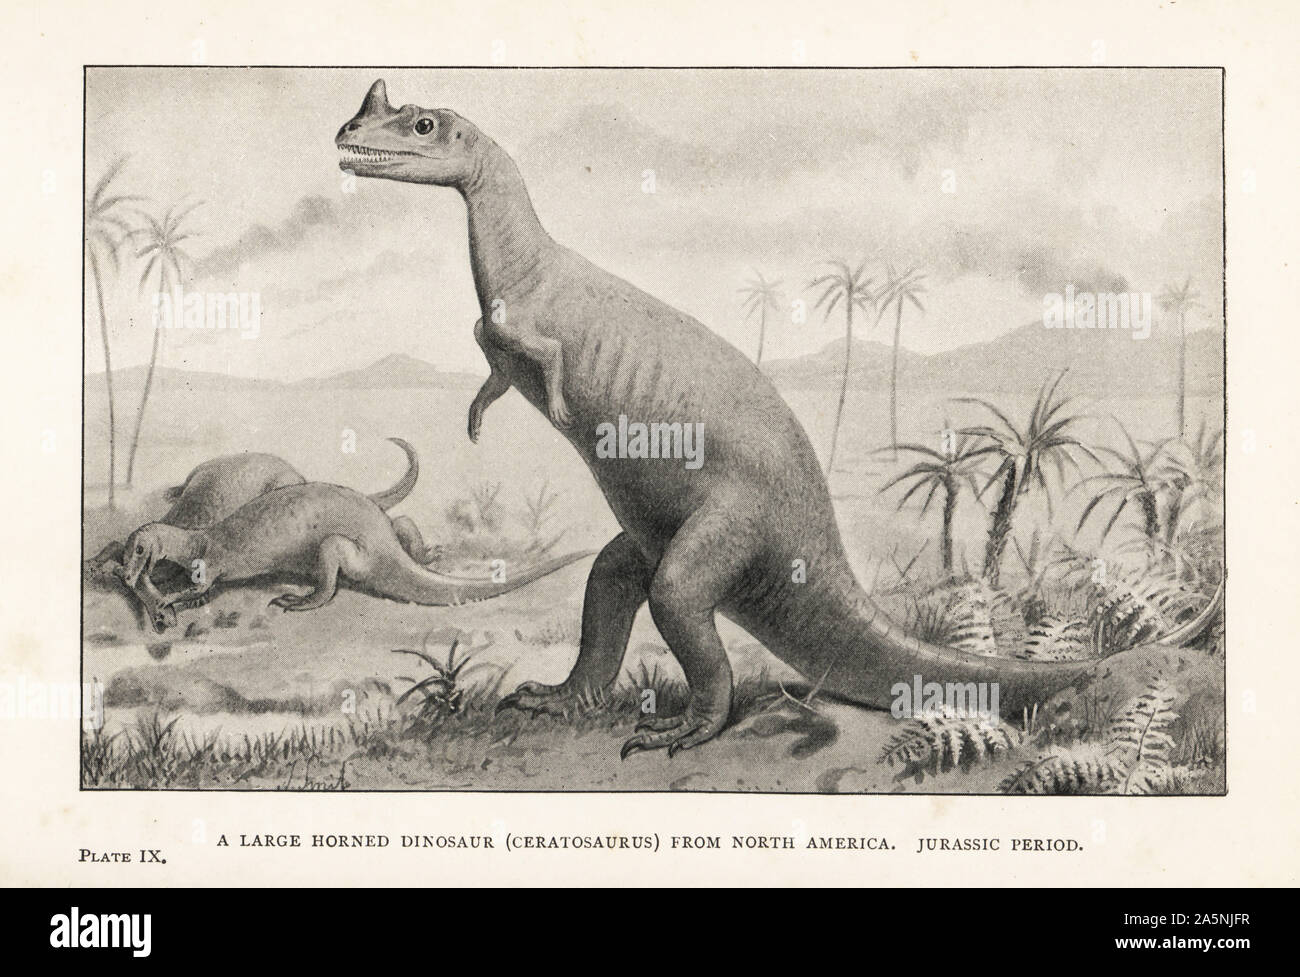 A large horned dinosaur, Ceratosaurus nasicornis, North America, Jurassic Period. Print after an illustration by Joseph Smit from Henry Neville Hutchinson’s Creatures of Other Days, Popular Studies in Palaeontology, Chapman and Hall, London, 1896. Stock Photo